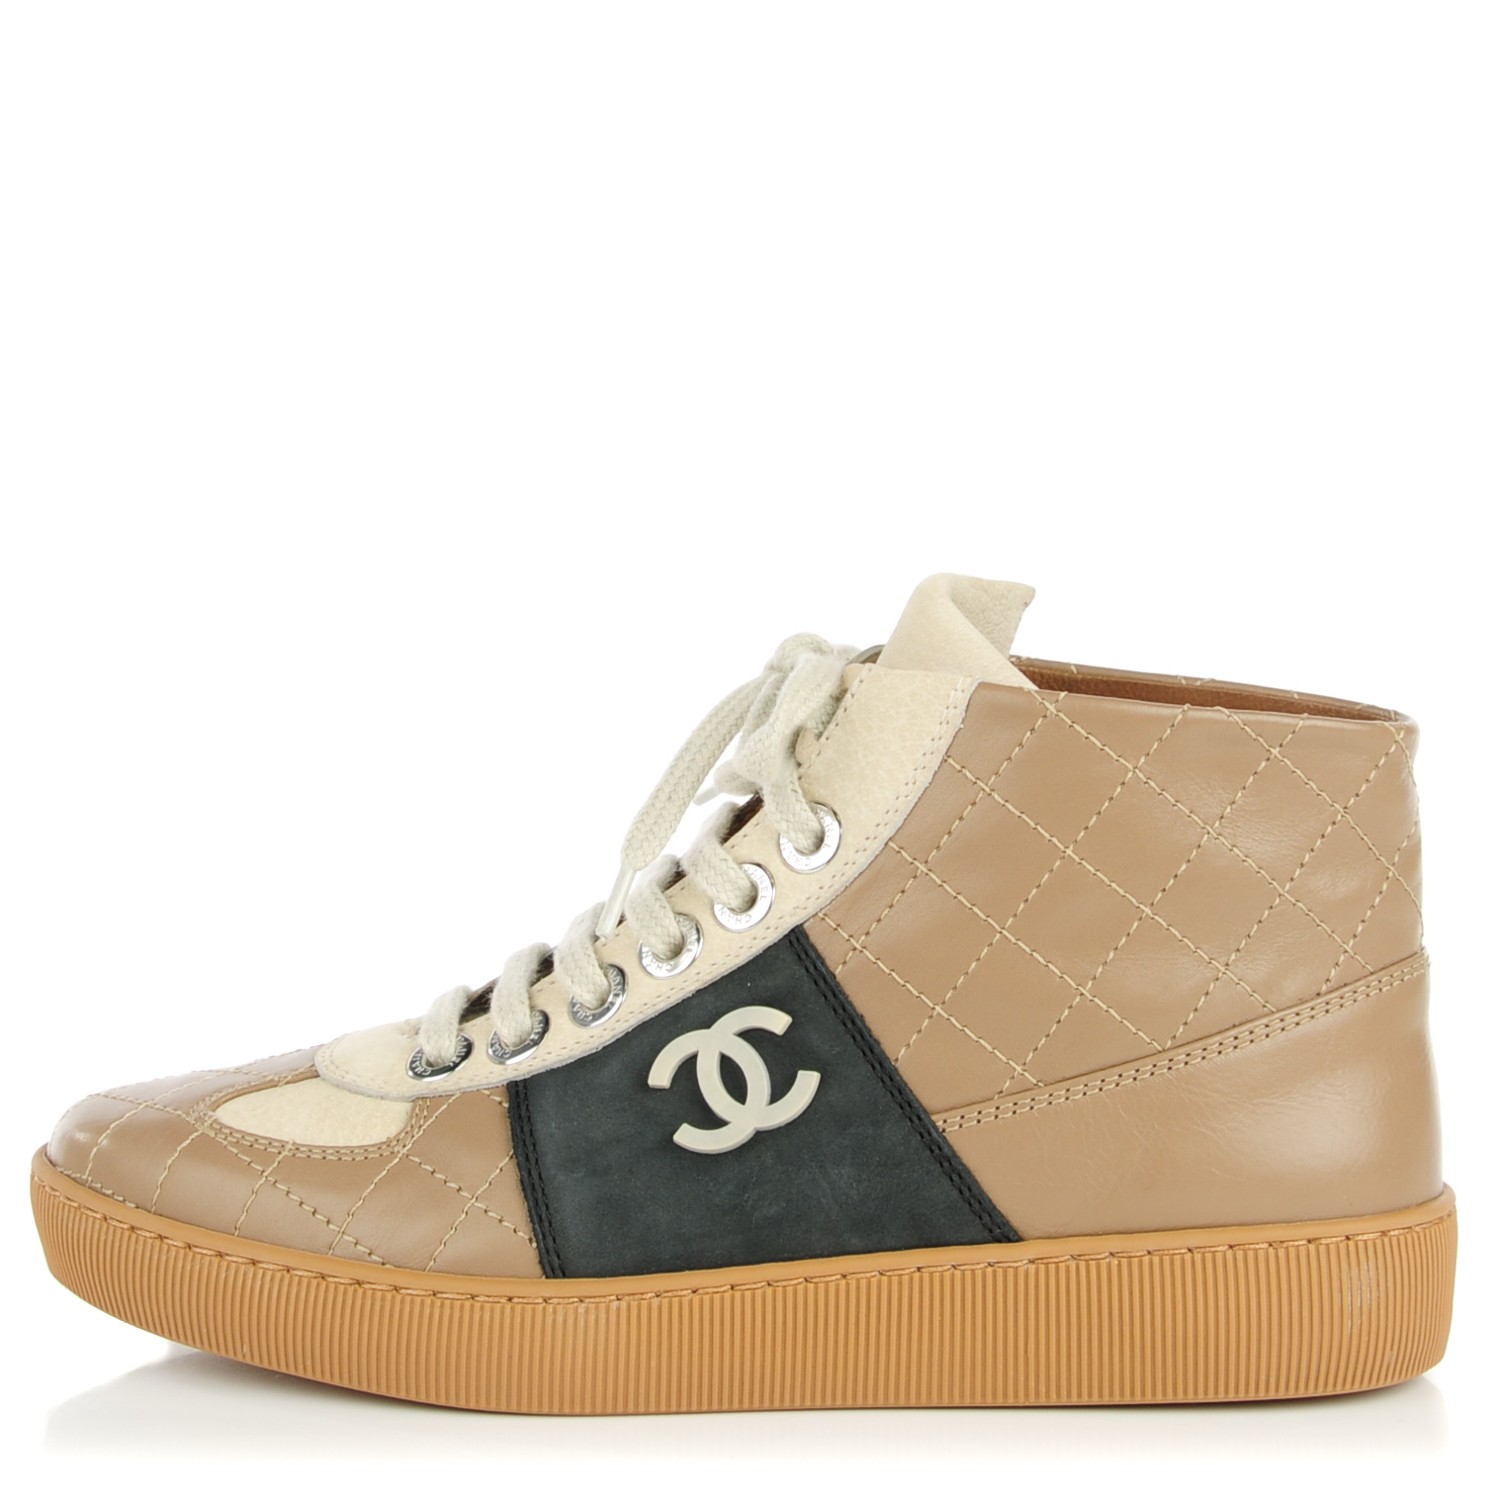 CHANEL Calfskin Quilted Hightop Tennis Shoes 35.5 Light Brown 132102